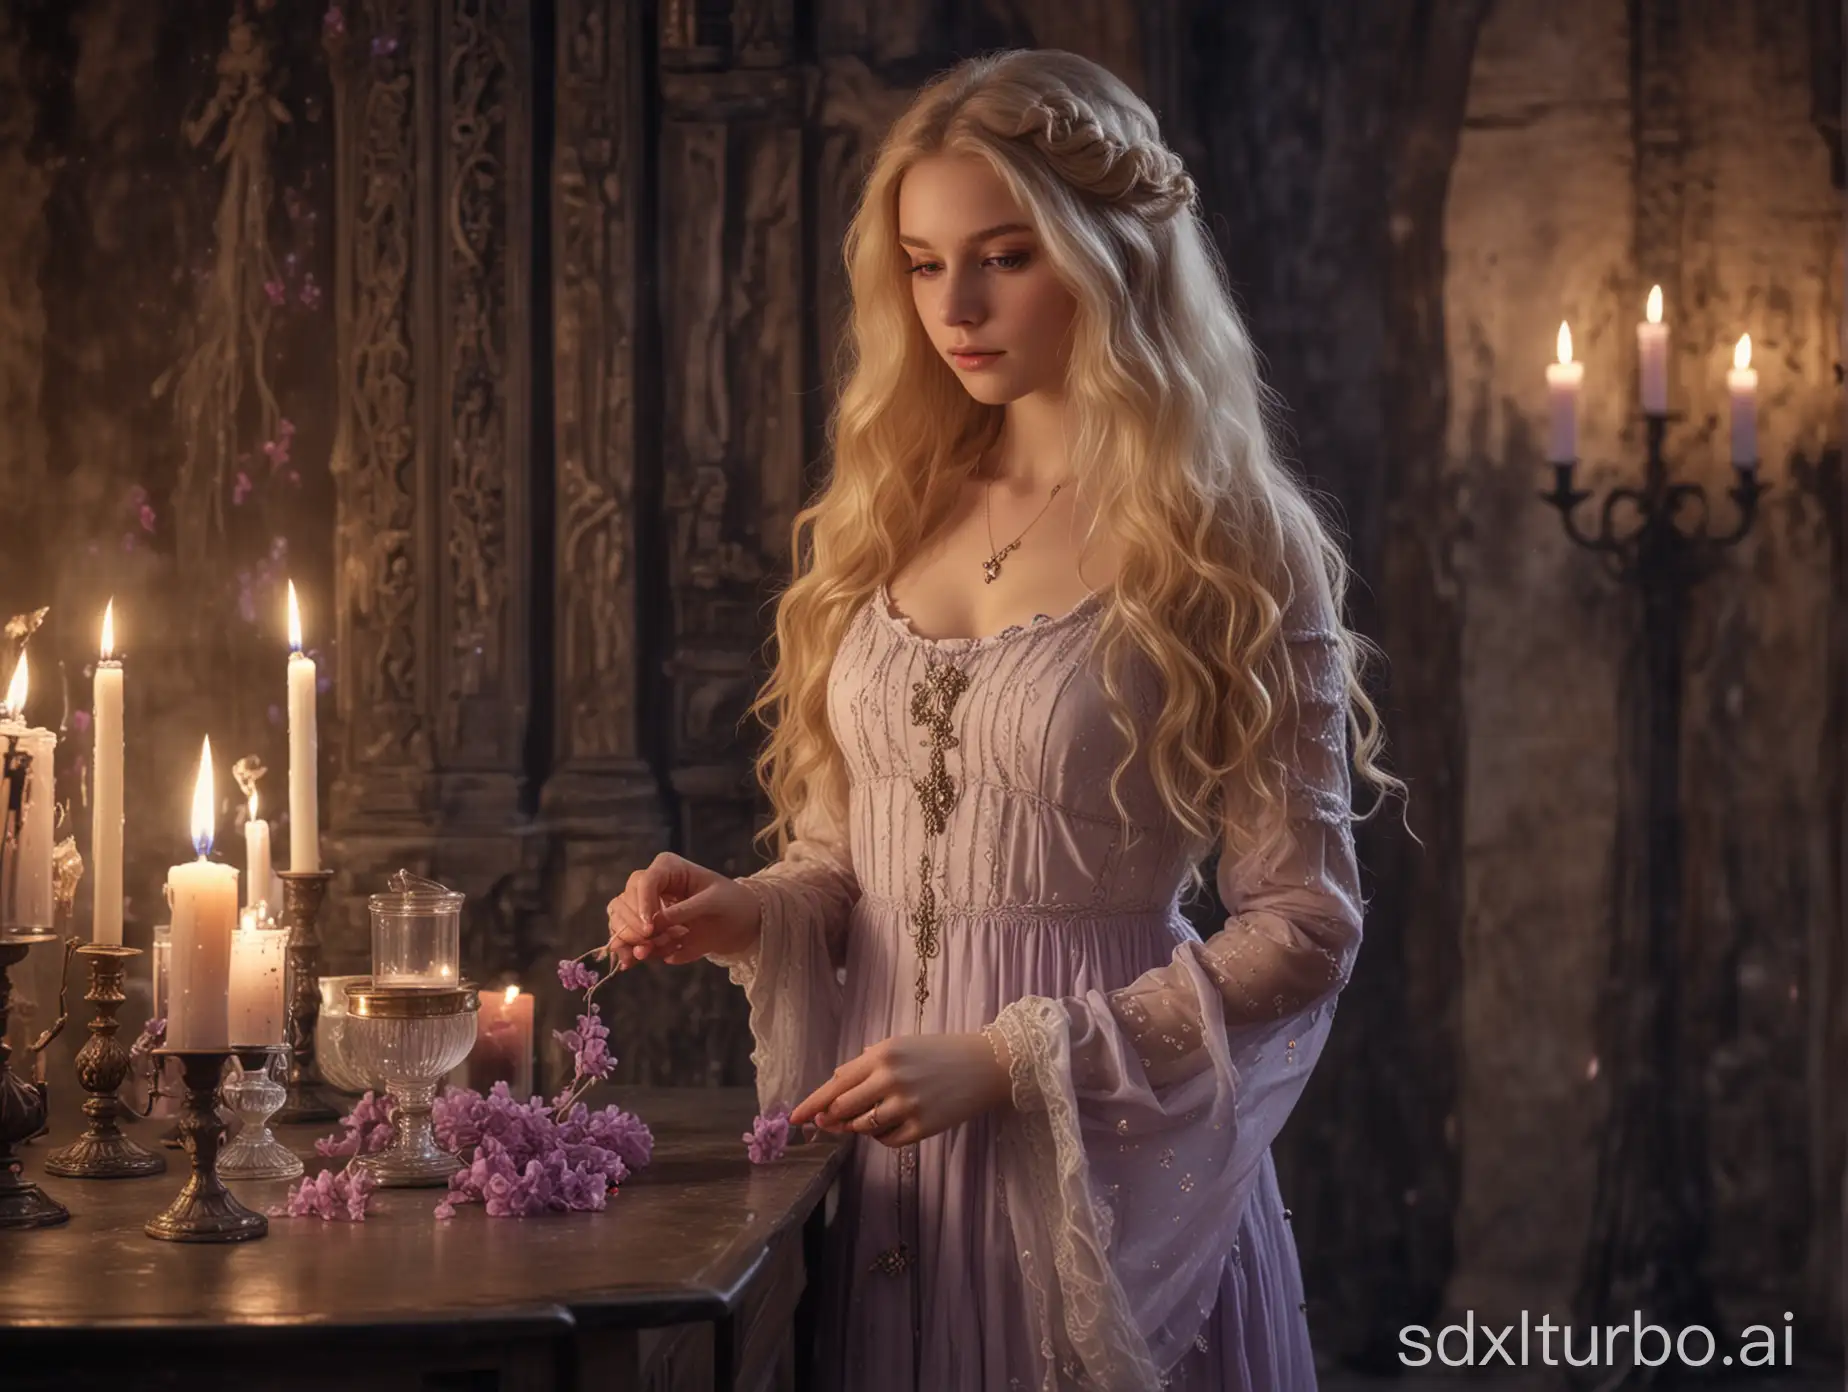 Mystical-Blonde-Girl-Admiring-Lilac-Water-in-Medieval-Setting